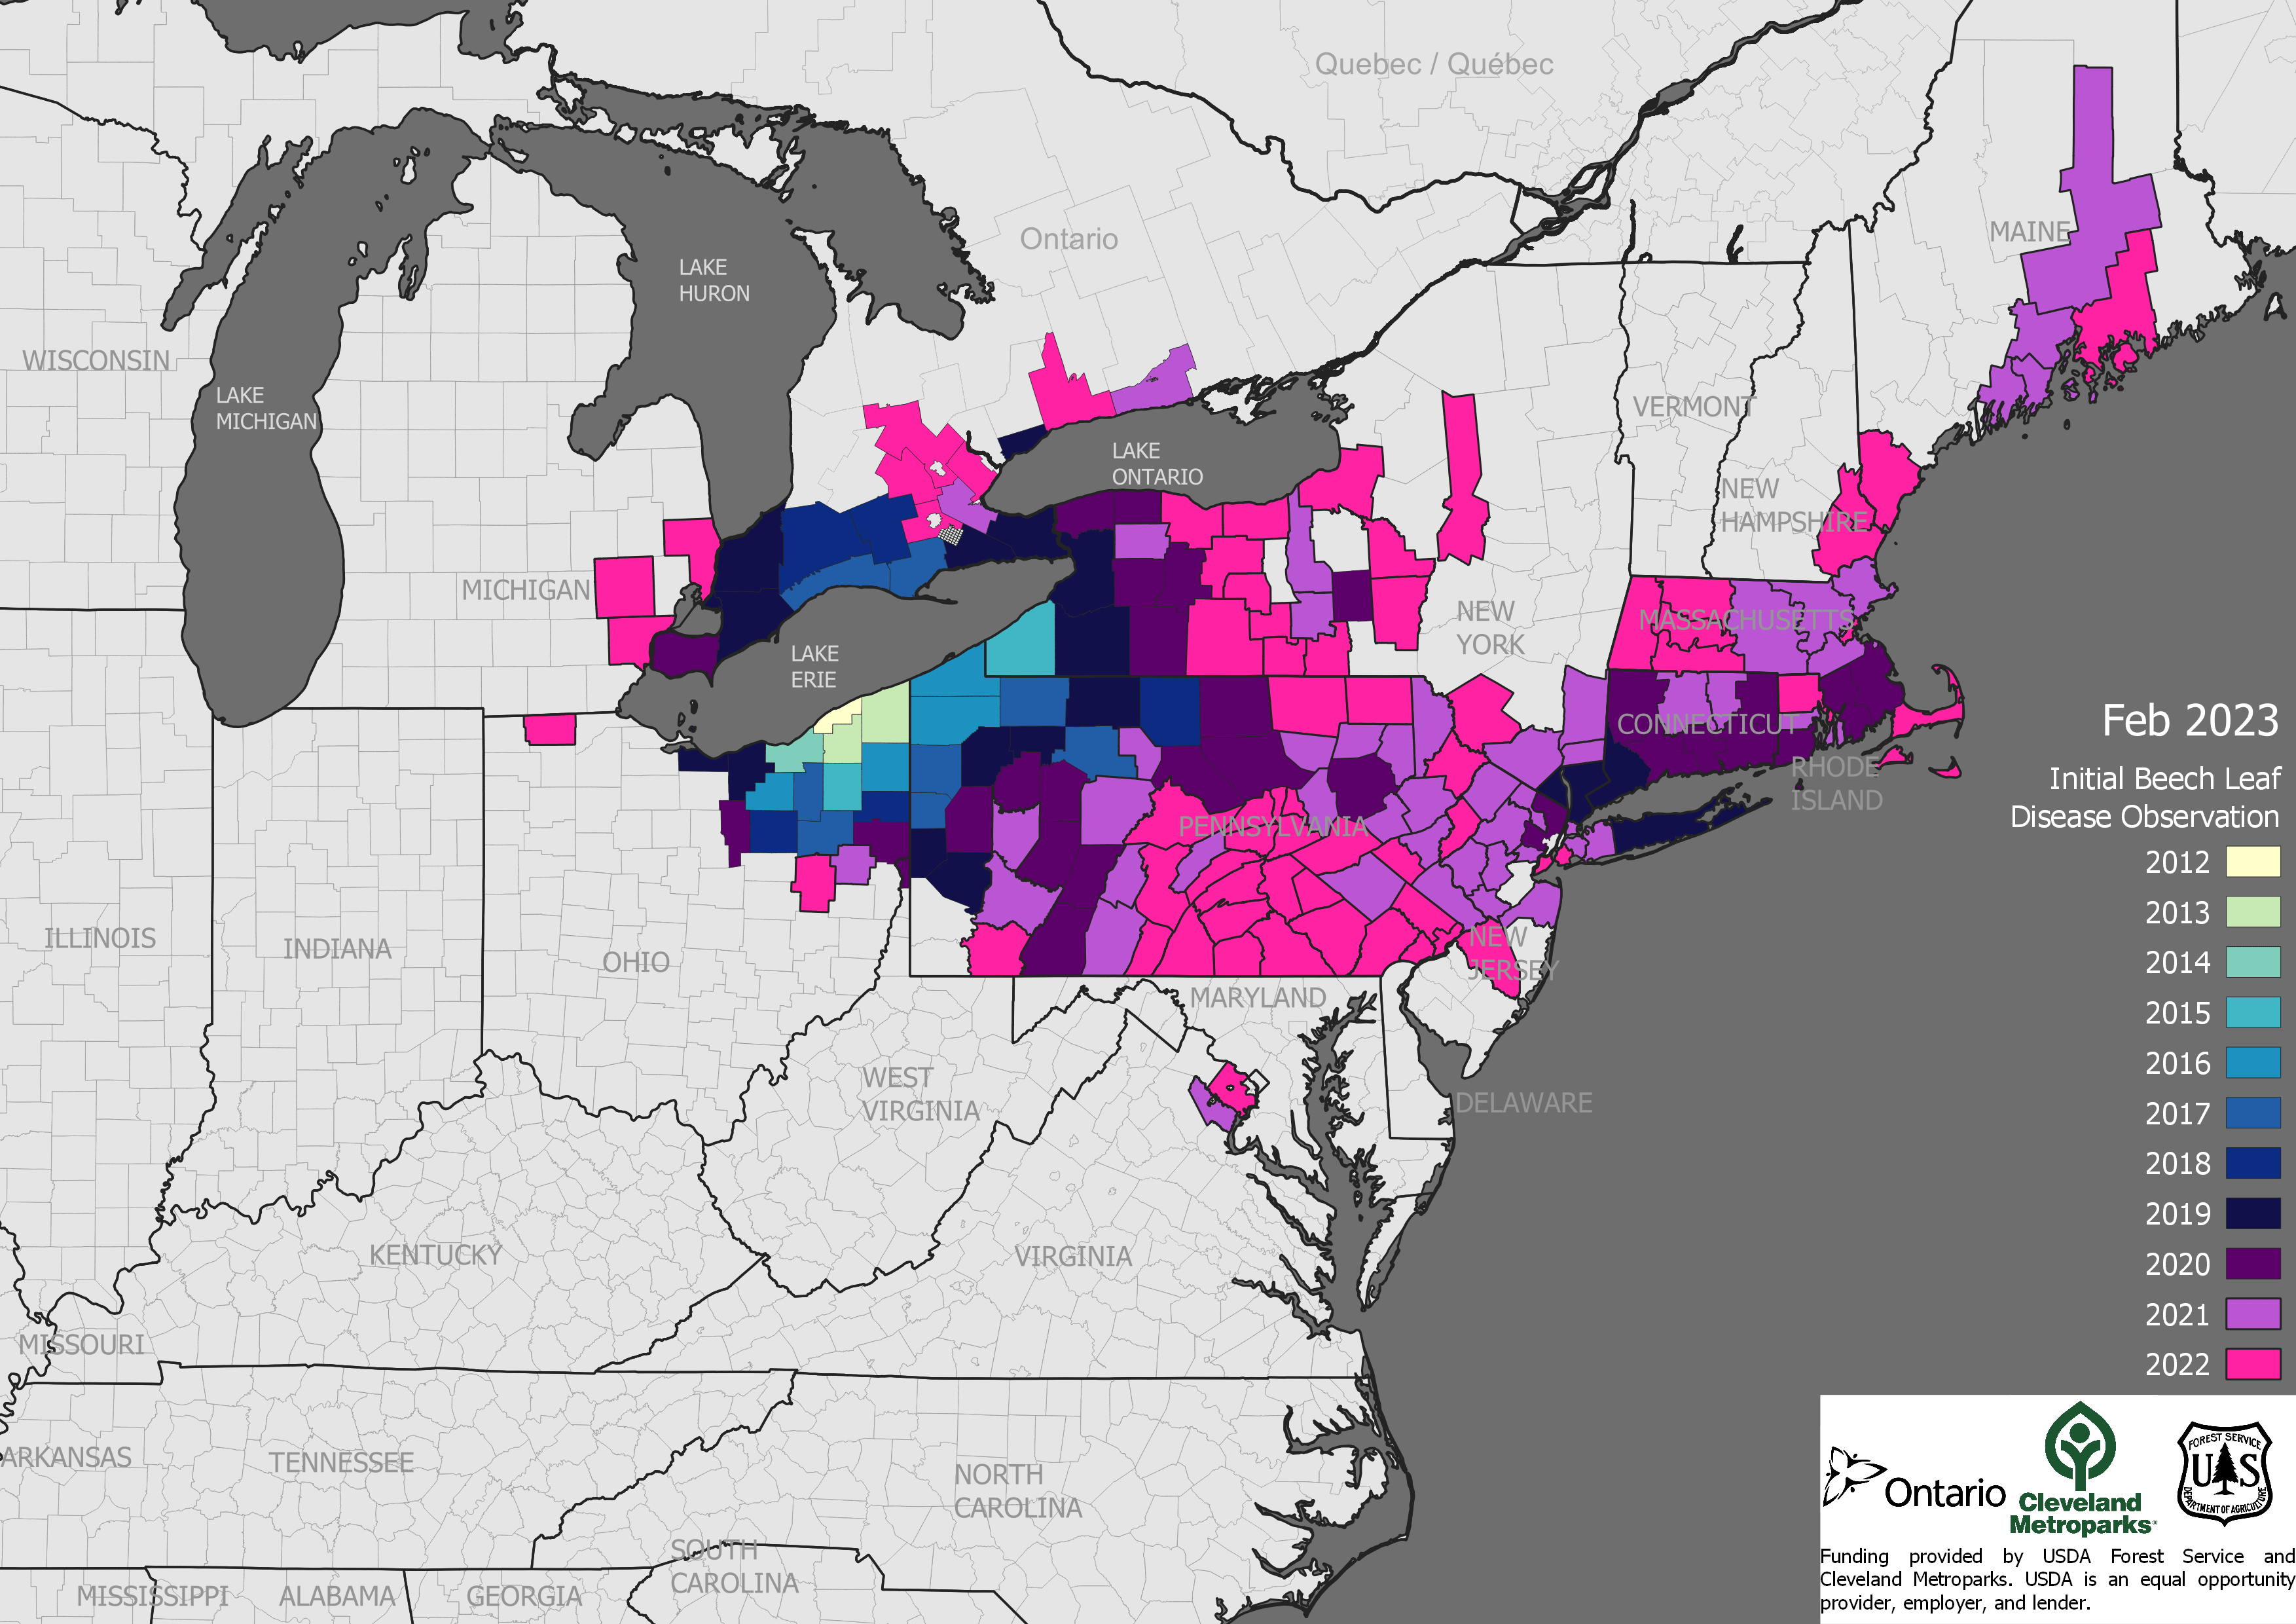 a map showing the distribution of beech leaf disease in the northeast United States as of February 2023